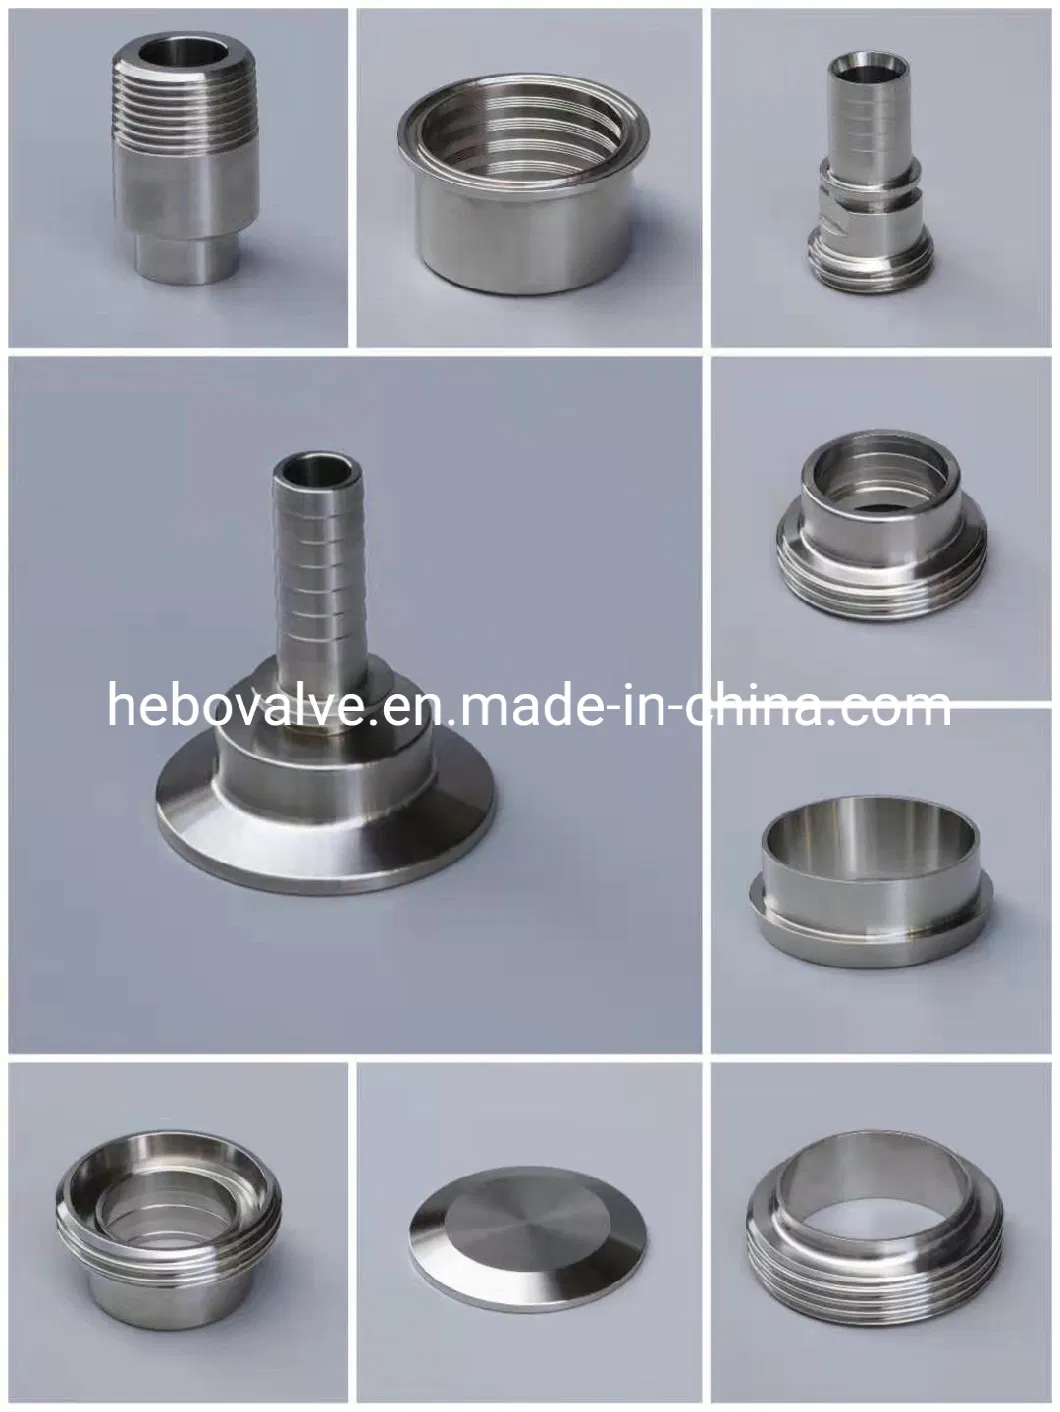 3A Sanitary Stainless Steel Pipe Fitting Hose Adapter